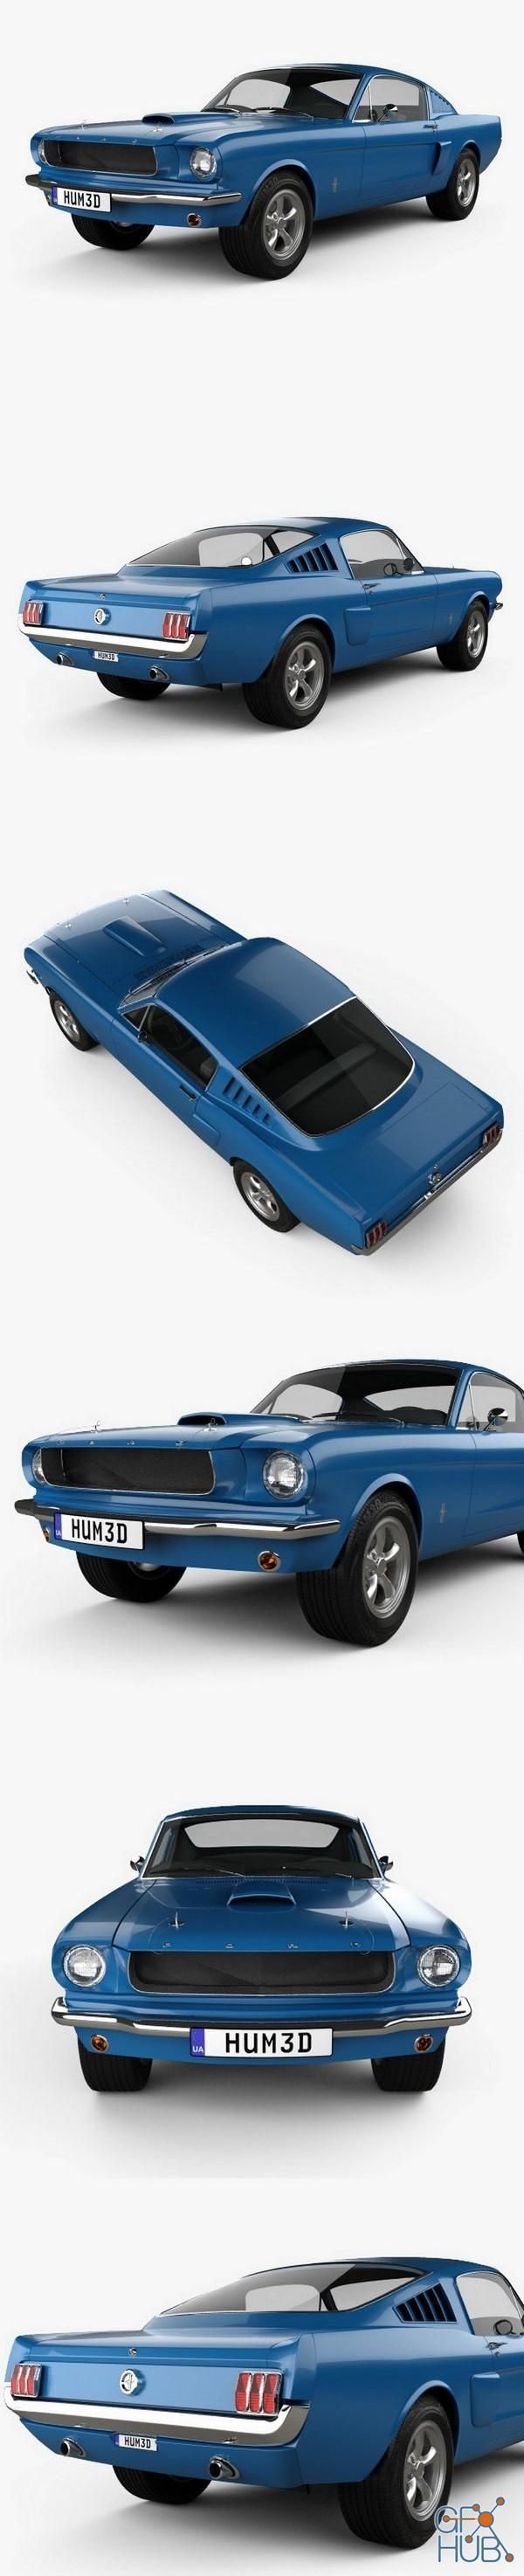 Ford Mustang Fastback 1965 Hum 3D